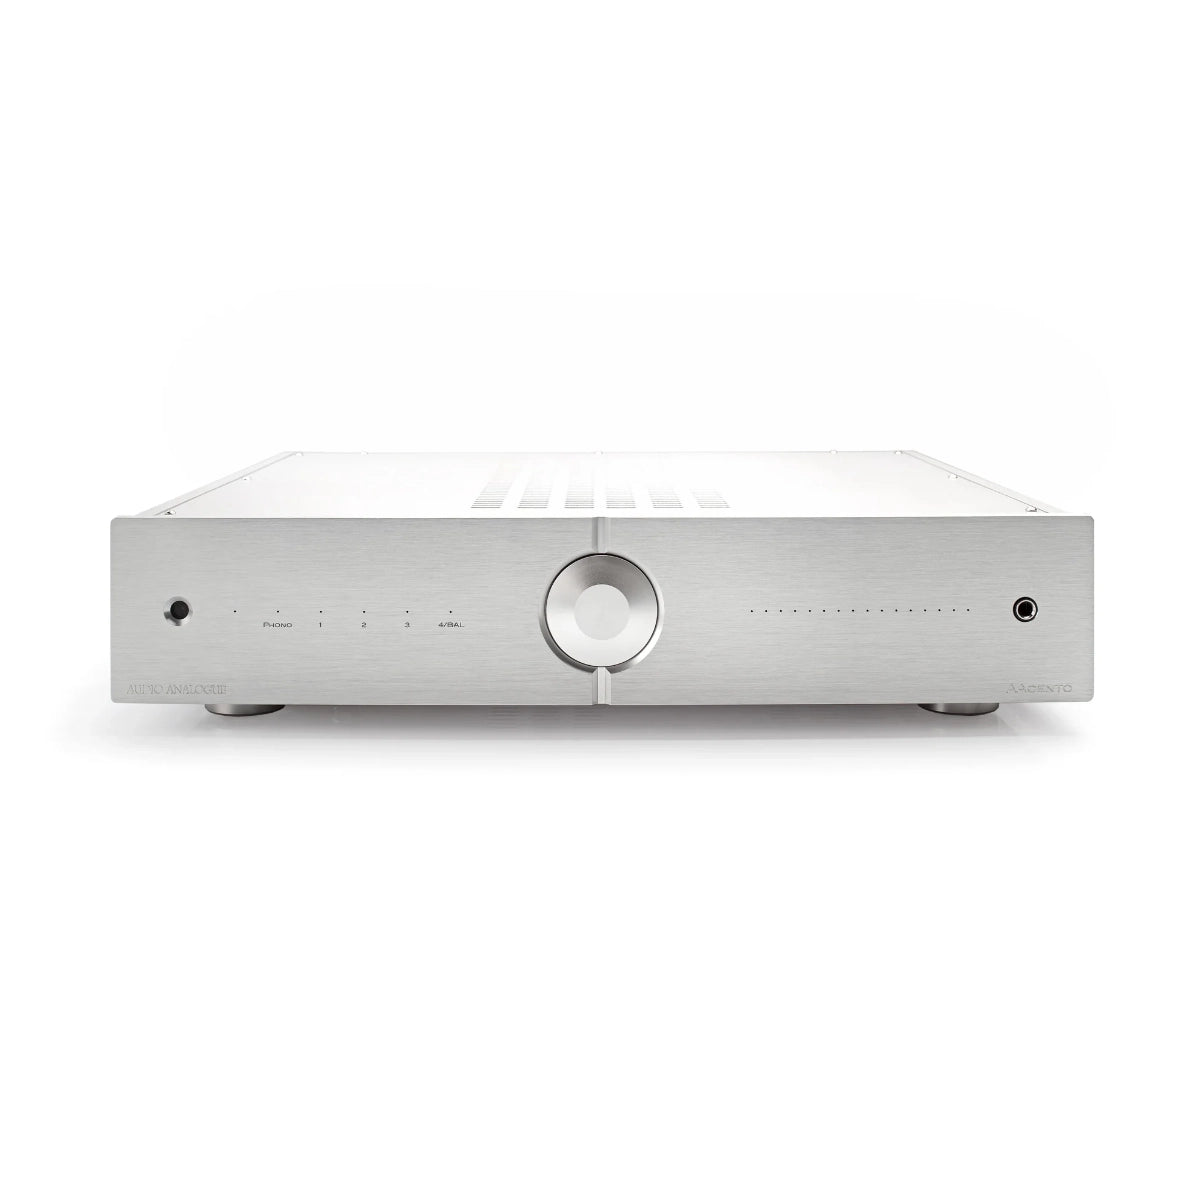 A picture of Audio Analogue's AAcento integrated amplifier in silver finish.